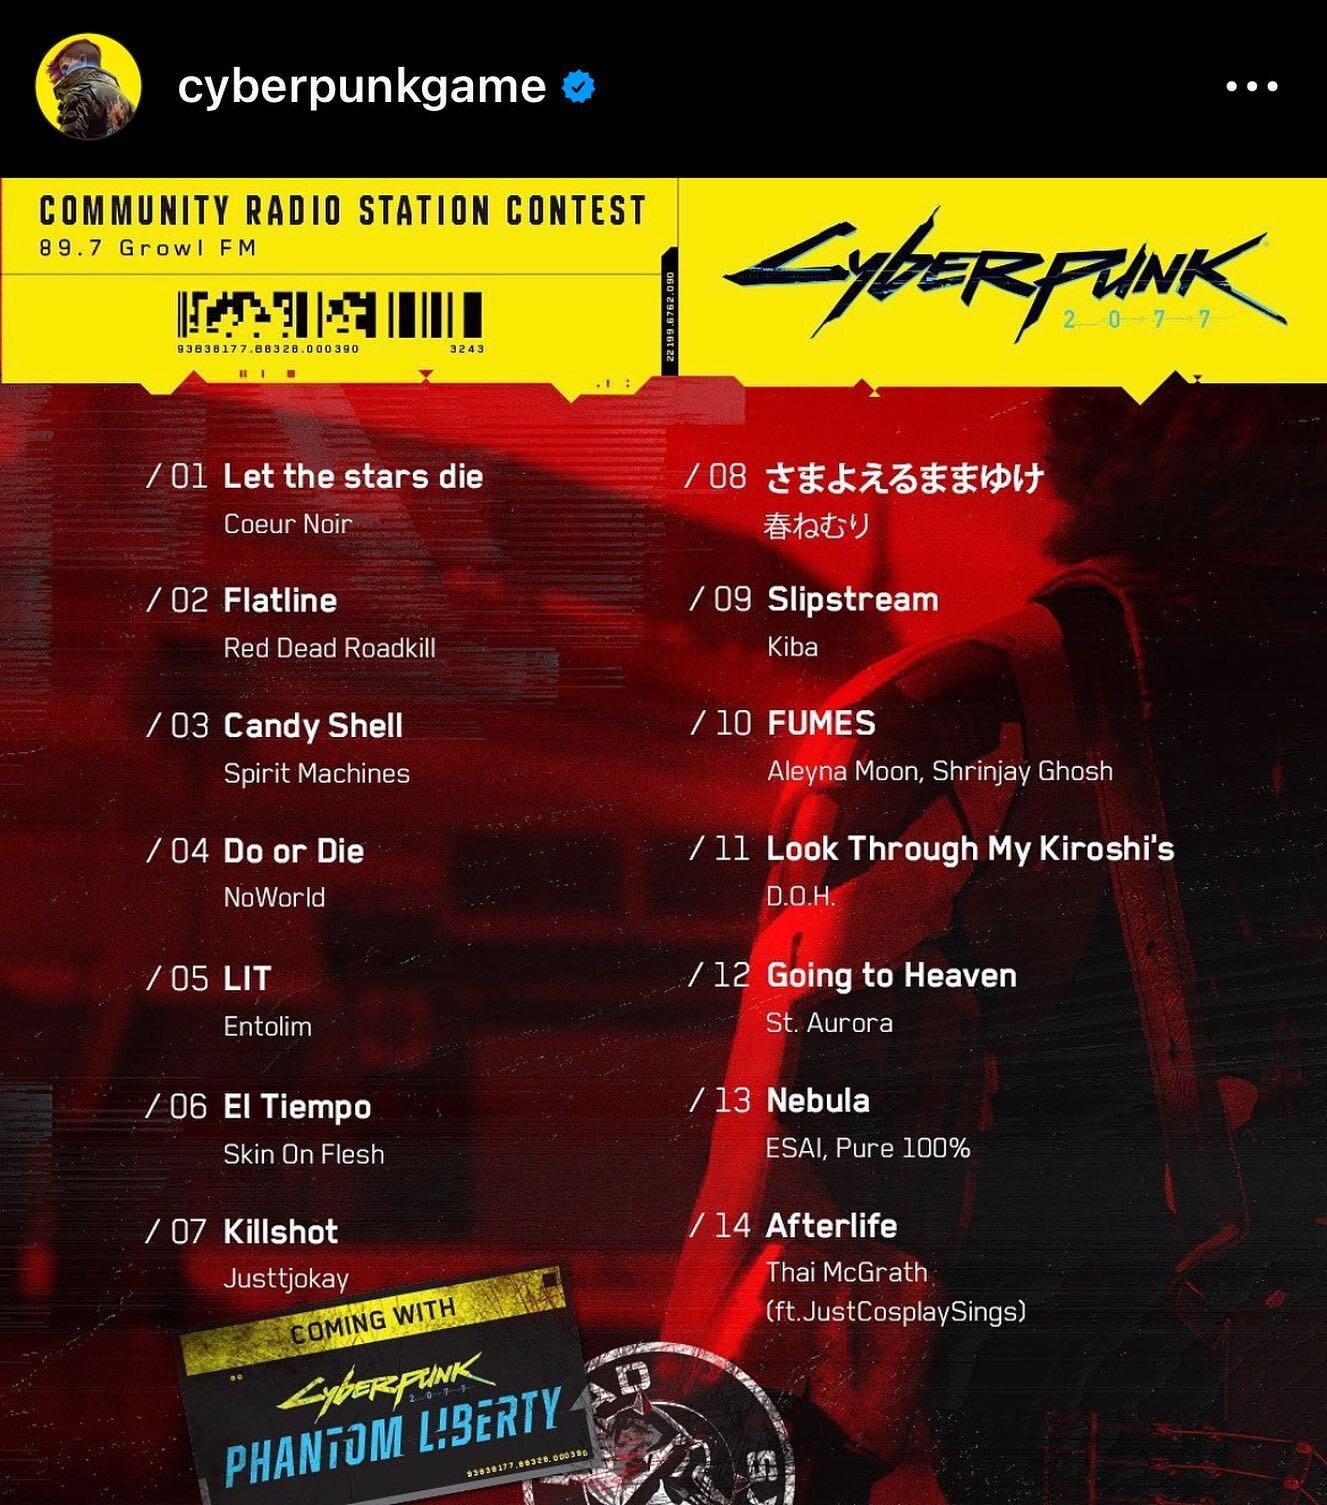 Wooohhh we&rsquo;re beyond excited to be part of Cyberpunk 2077&rsquo;s GrowlFM Community radio station!! 

Thank you so much @cyberpunkgame for selecting our track! Congratulations to all the other winners as well!! Can&rsquo;t wait to hear all the 